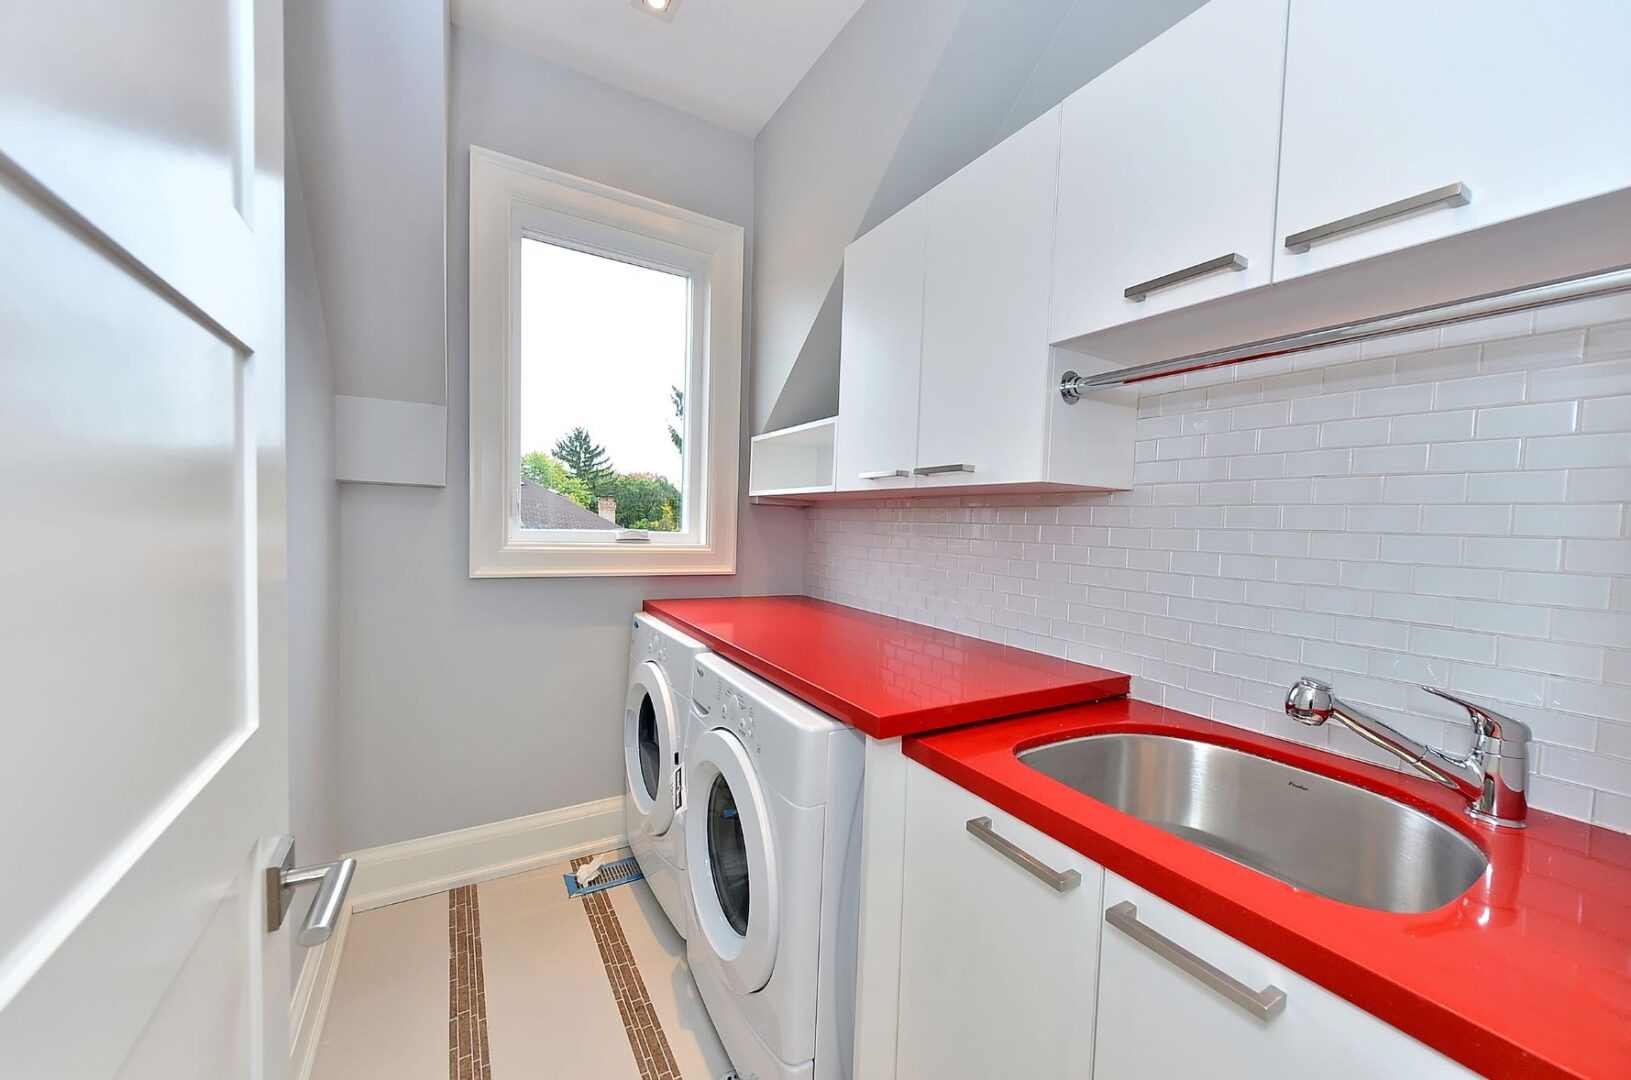 A Laundry Room With a Red Counter Space